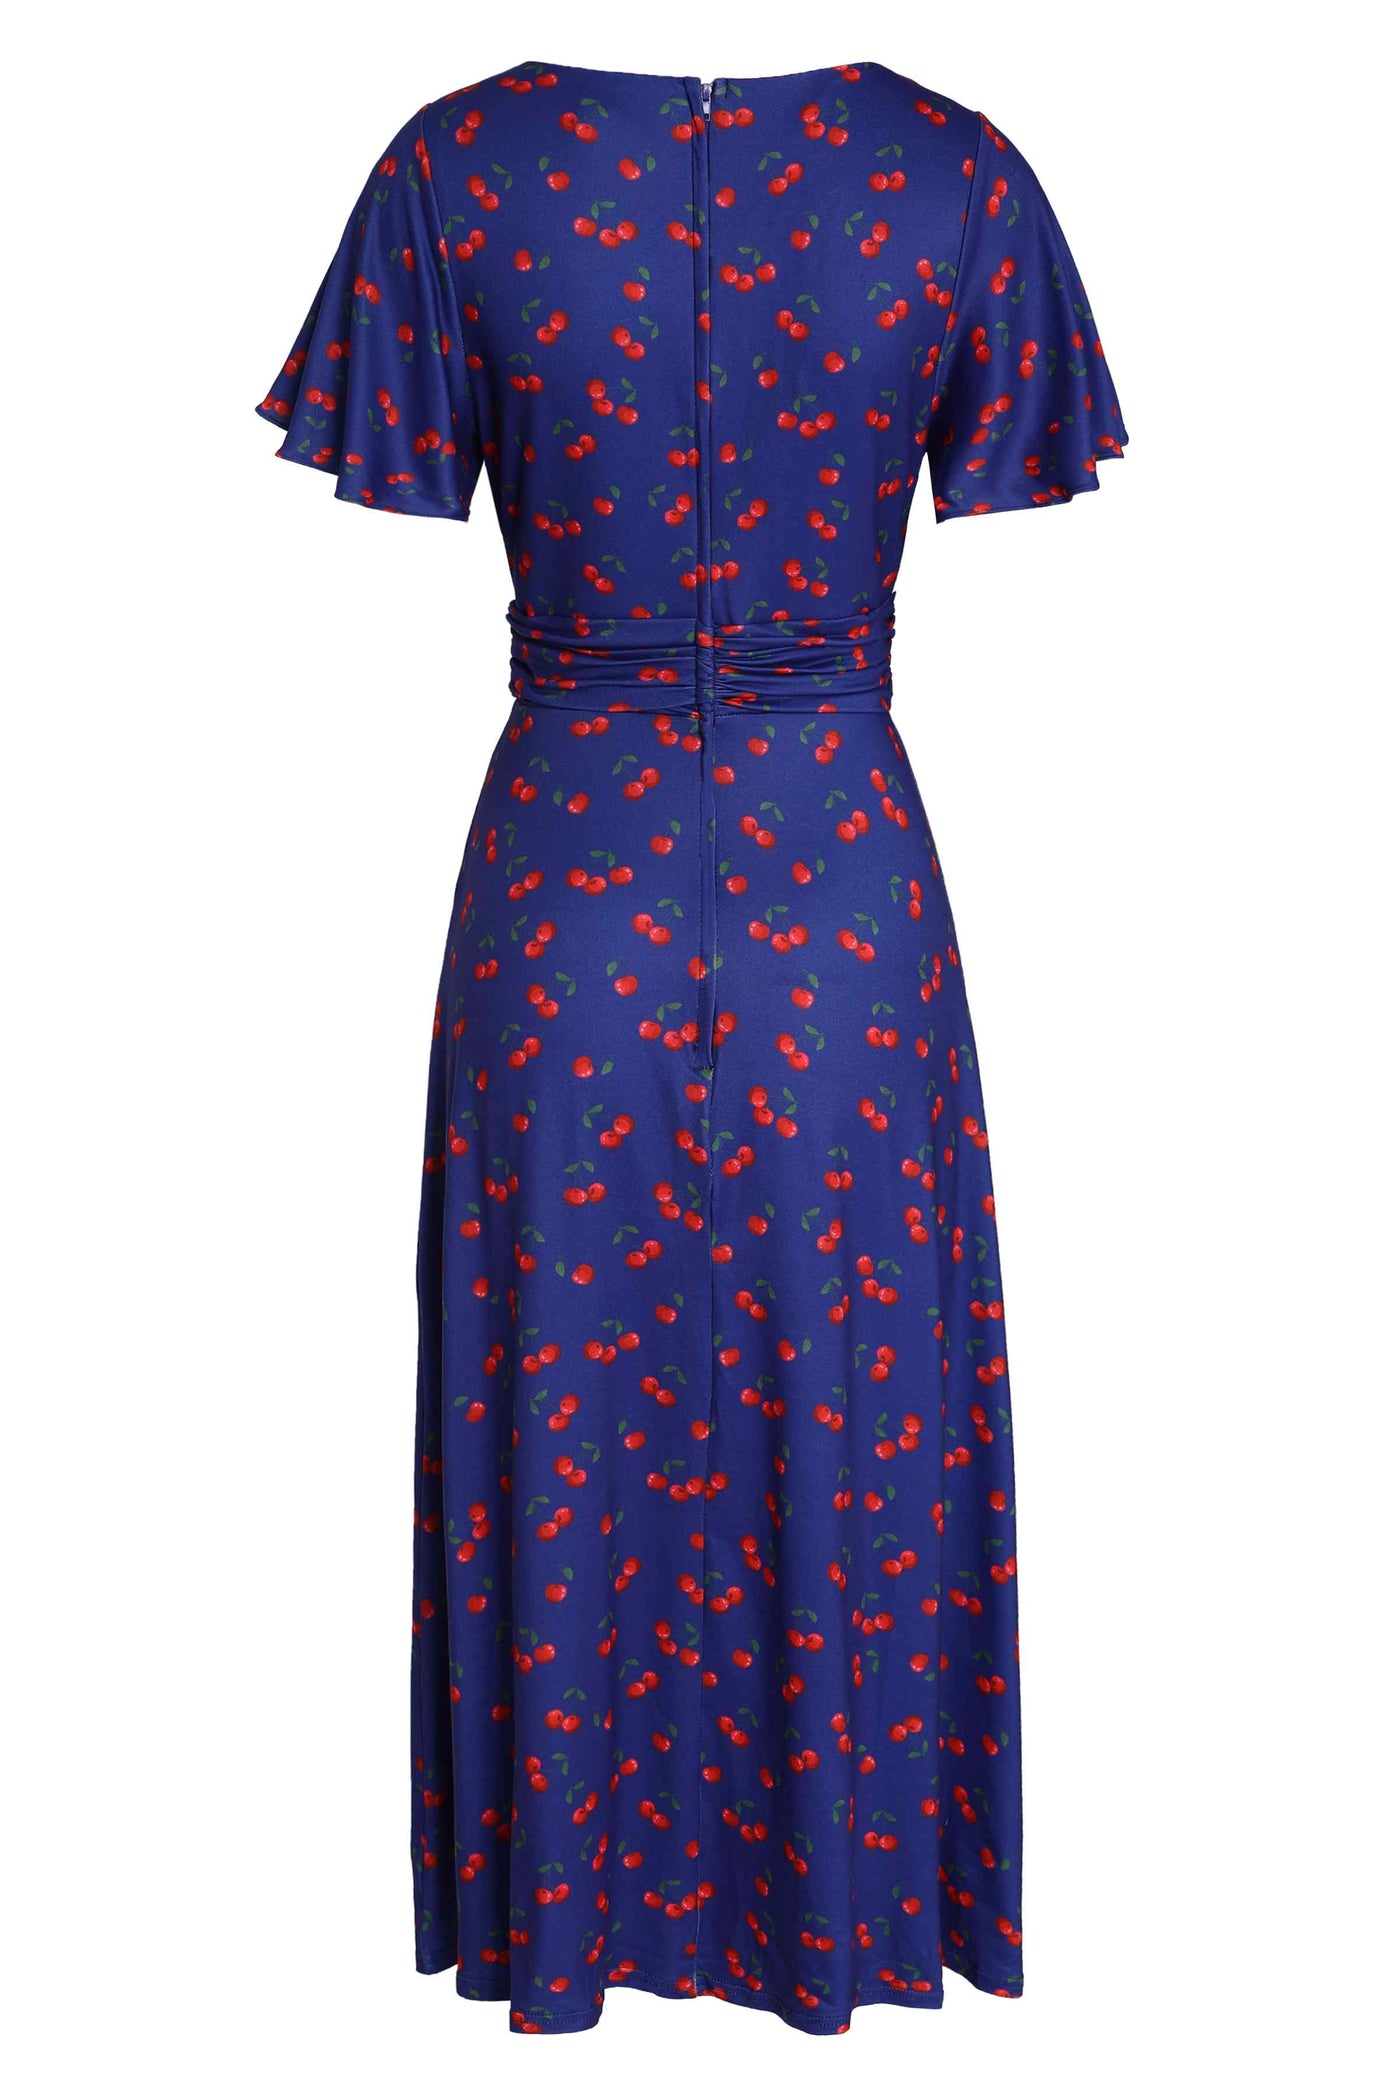 Back View of Cherry Print Tea Dress in Navy Blue